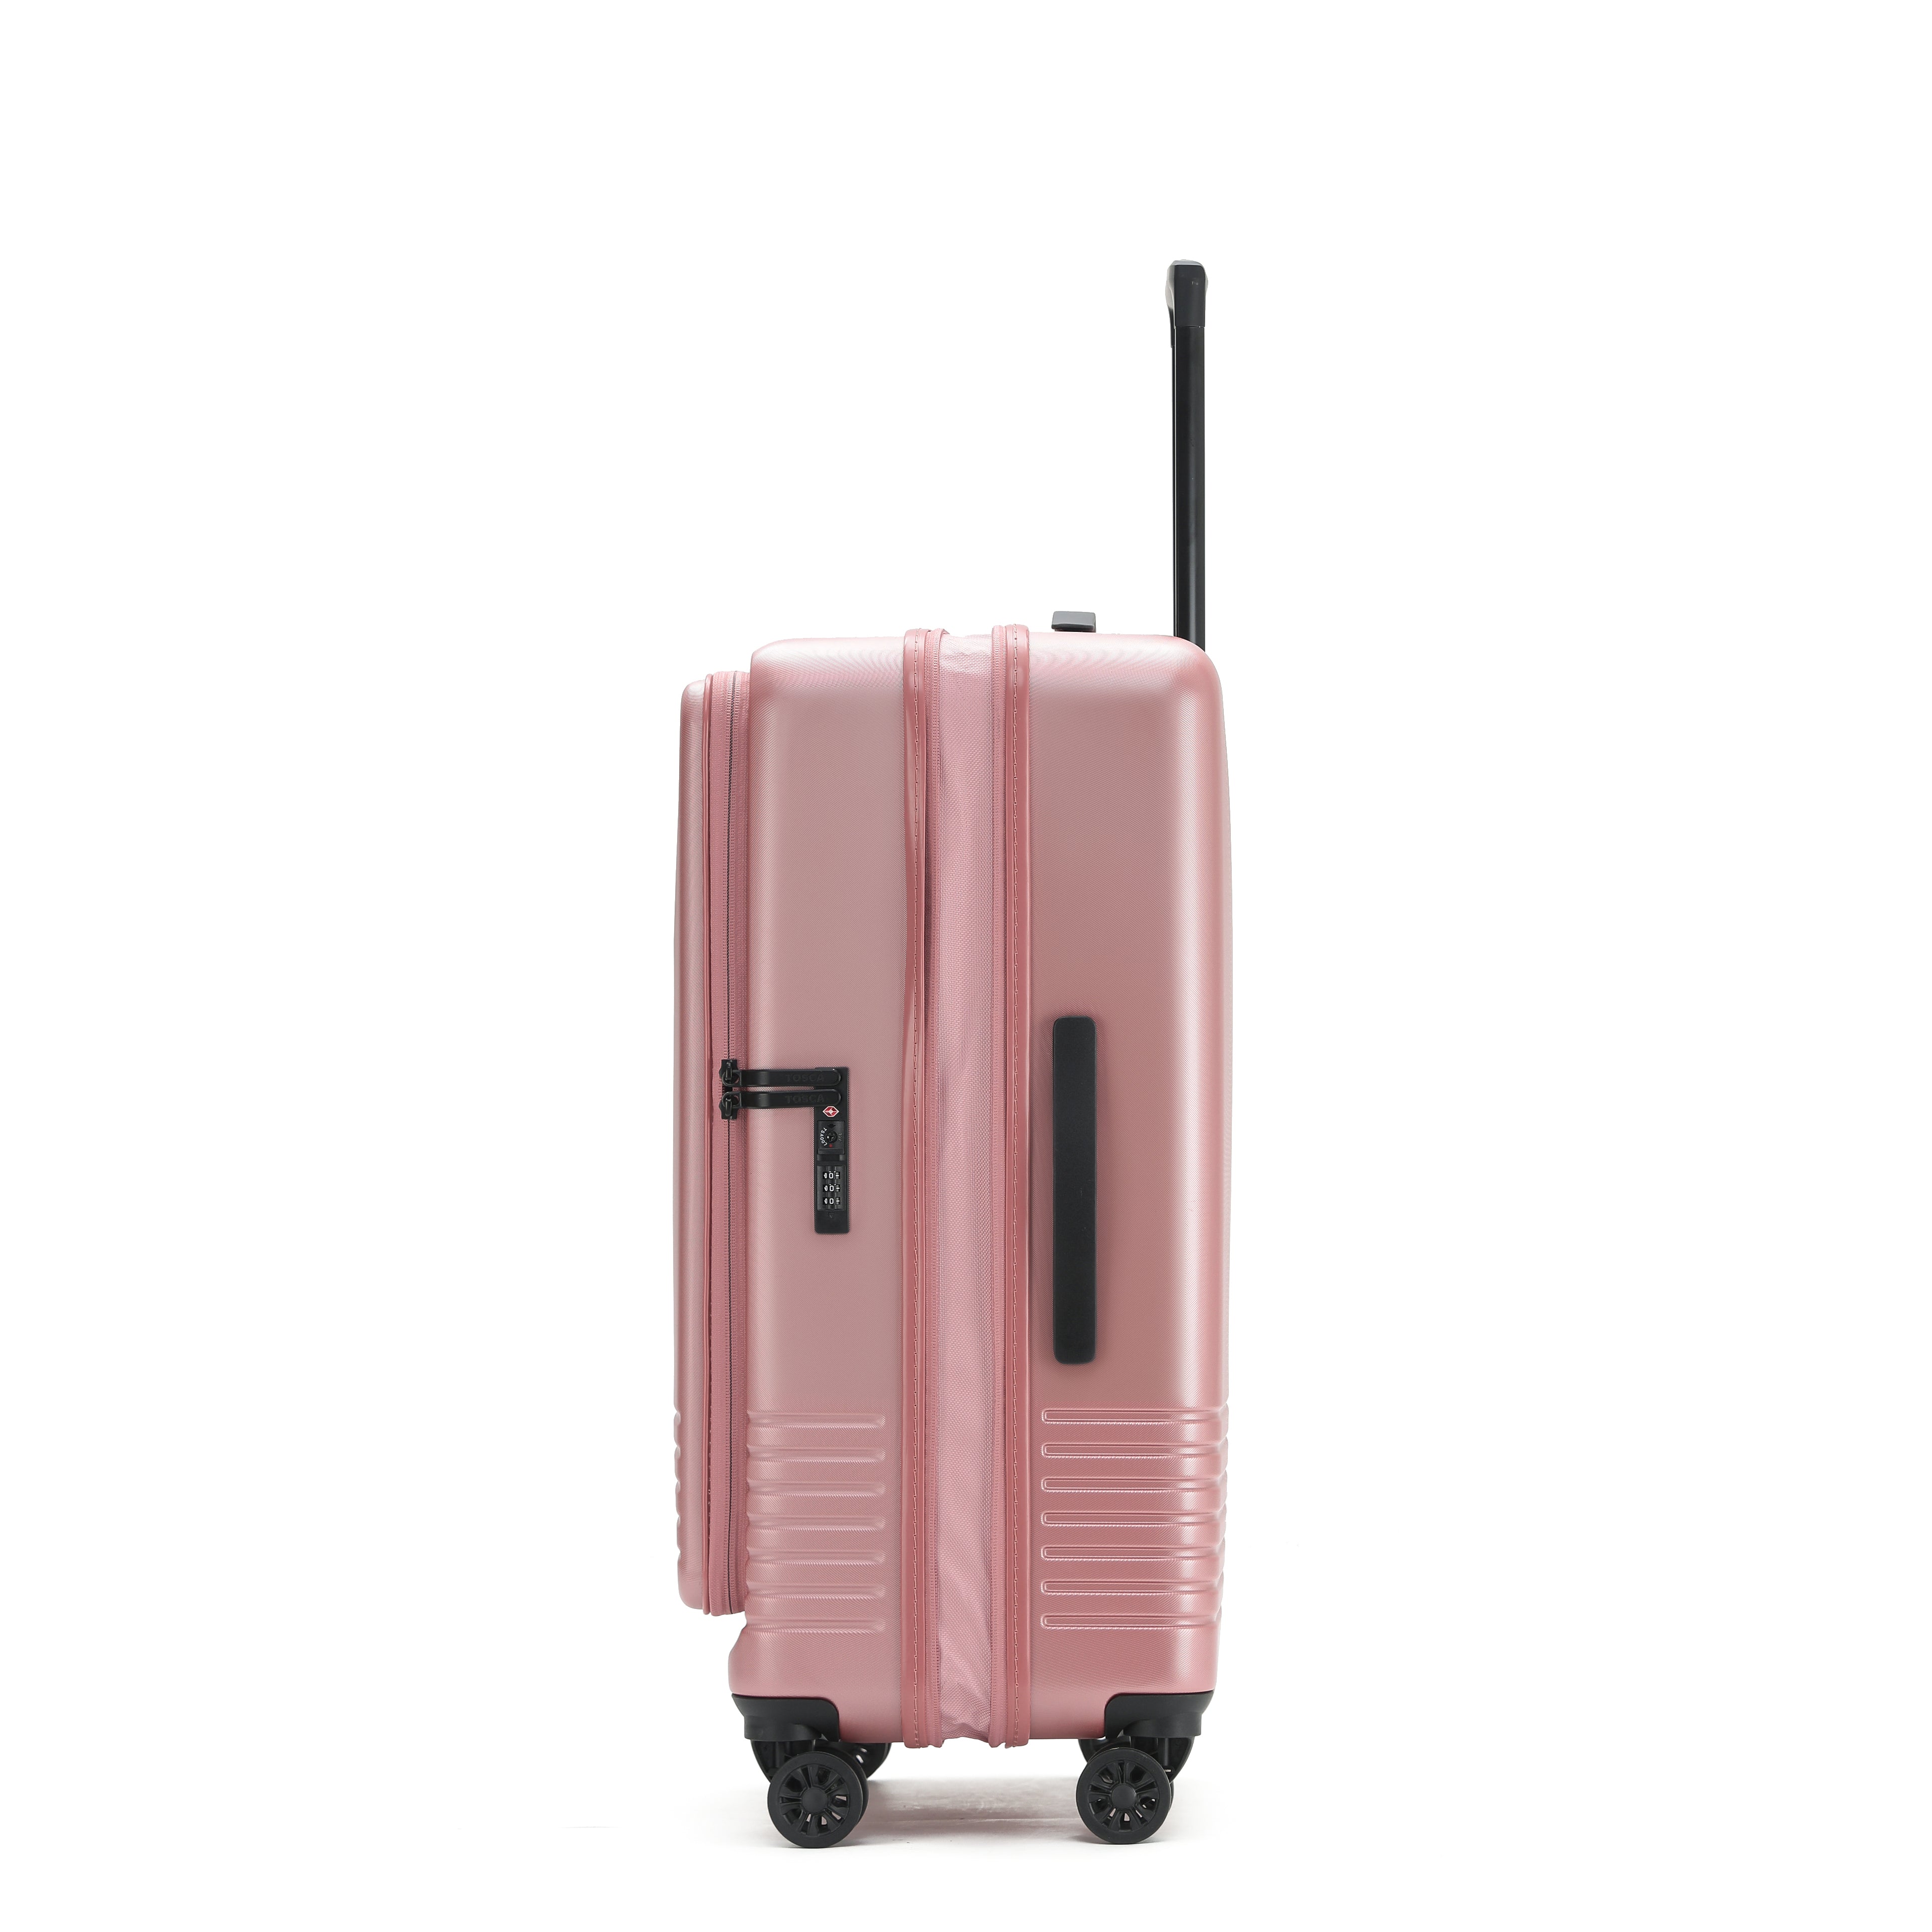 Tosca - TCA644 Horizon Front lid opening Set of 3 suitcases - Dusty Rose-11